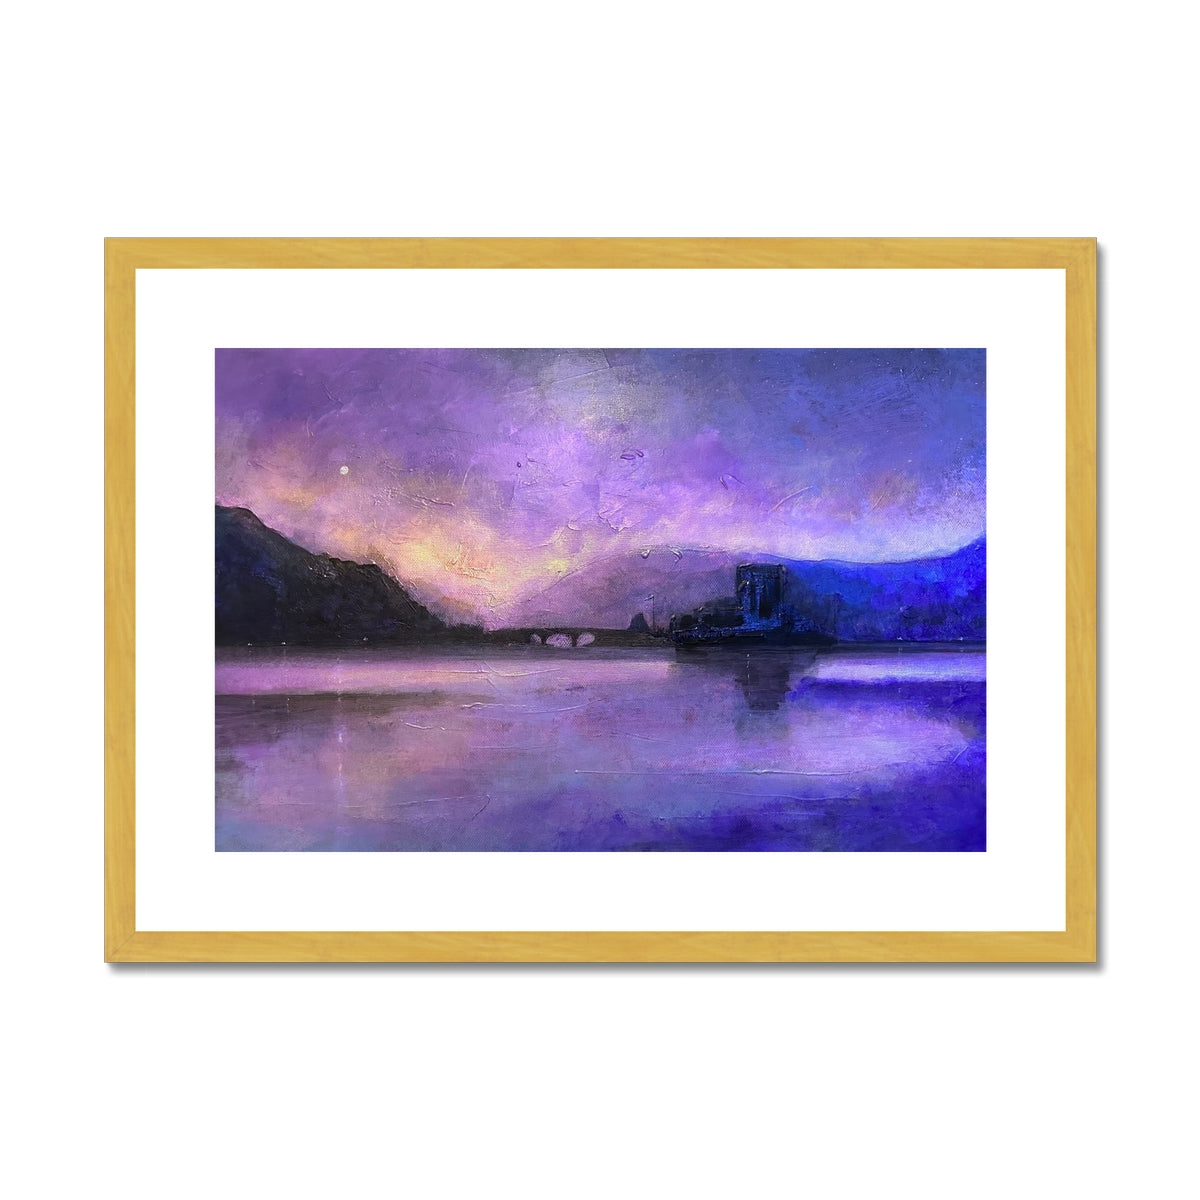 Eilean Donan Castle Moonset Painting | Antique Framed & Mounted Prints From Scotland-Antique Framed & Mounted Prints-Historic & Iconic Scotland Art Gallery-A2 Landscape-Gold Frame-Paintings, Prints, Homeware, Art Gifts From Scotland By Scottish Artist Kevin Hunter